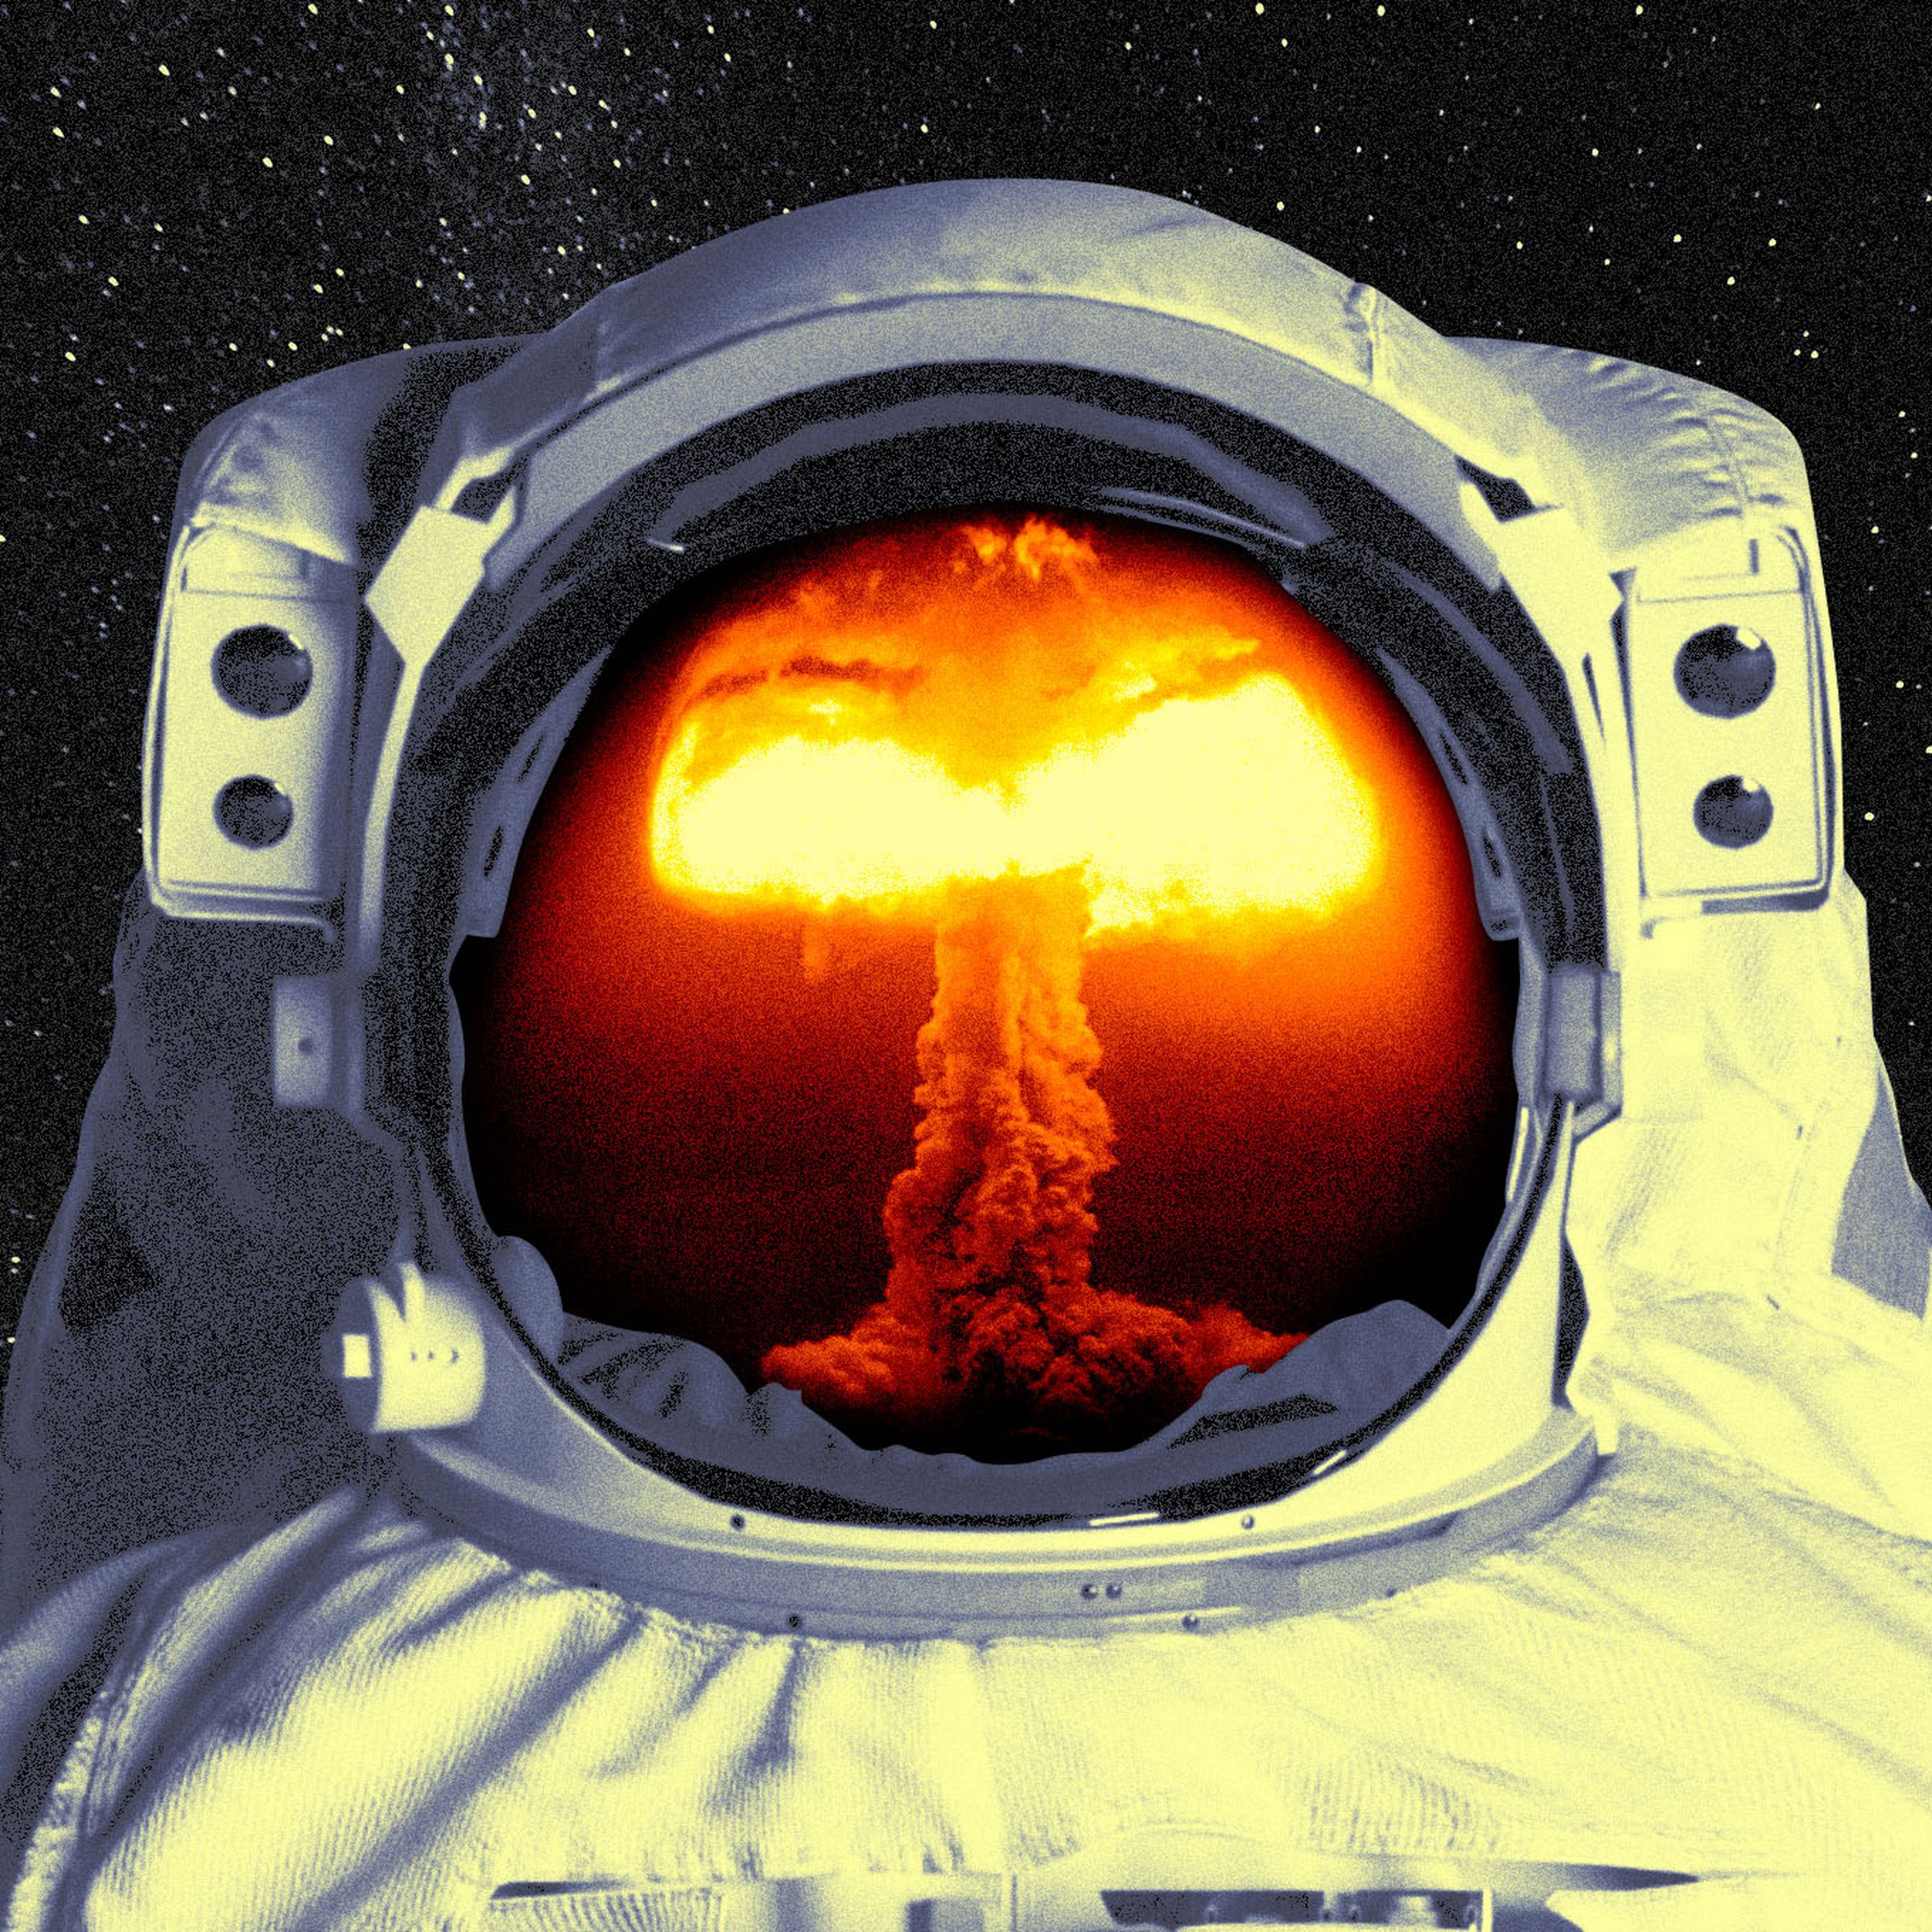 Photo collage of an astronaut with the reflection of a mushroom cloud in their helmet.